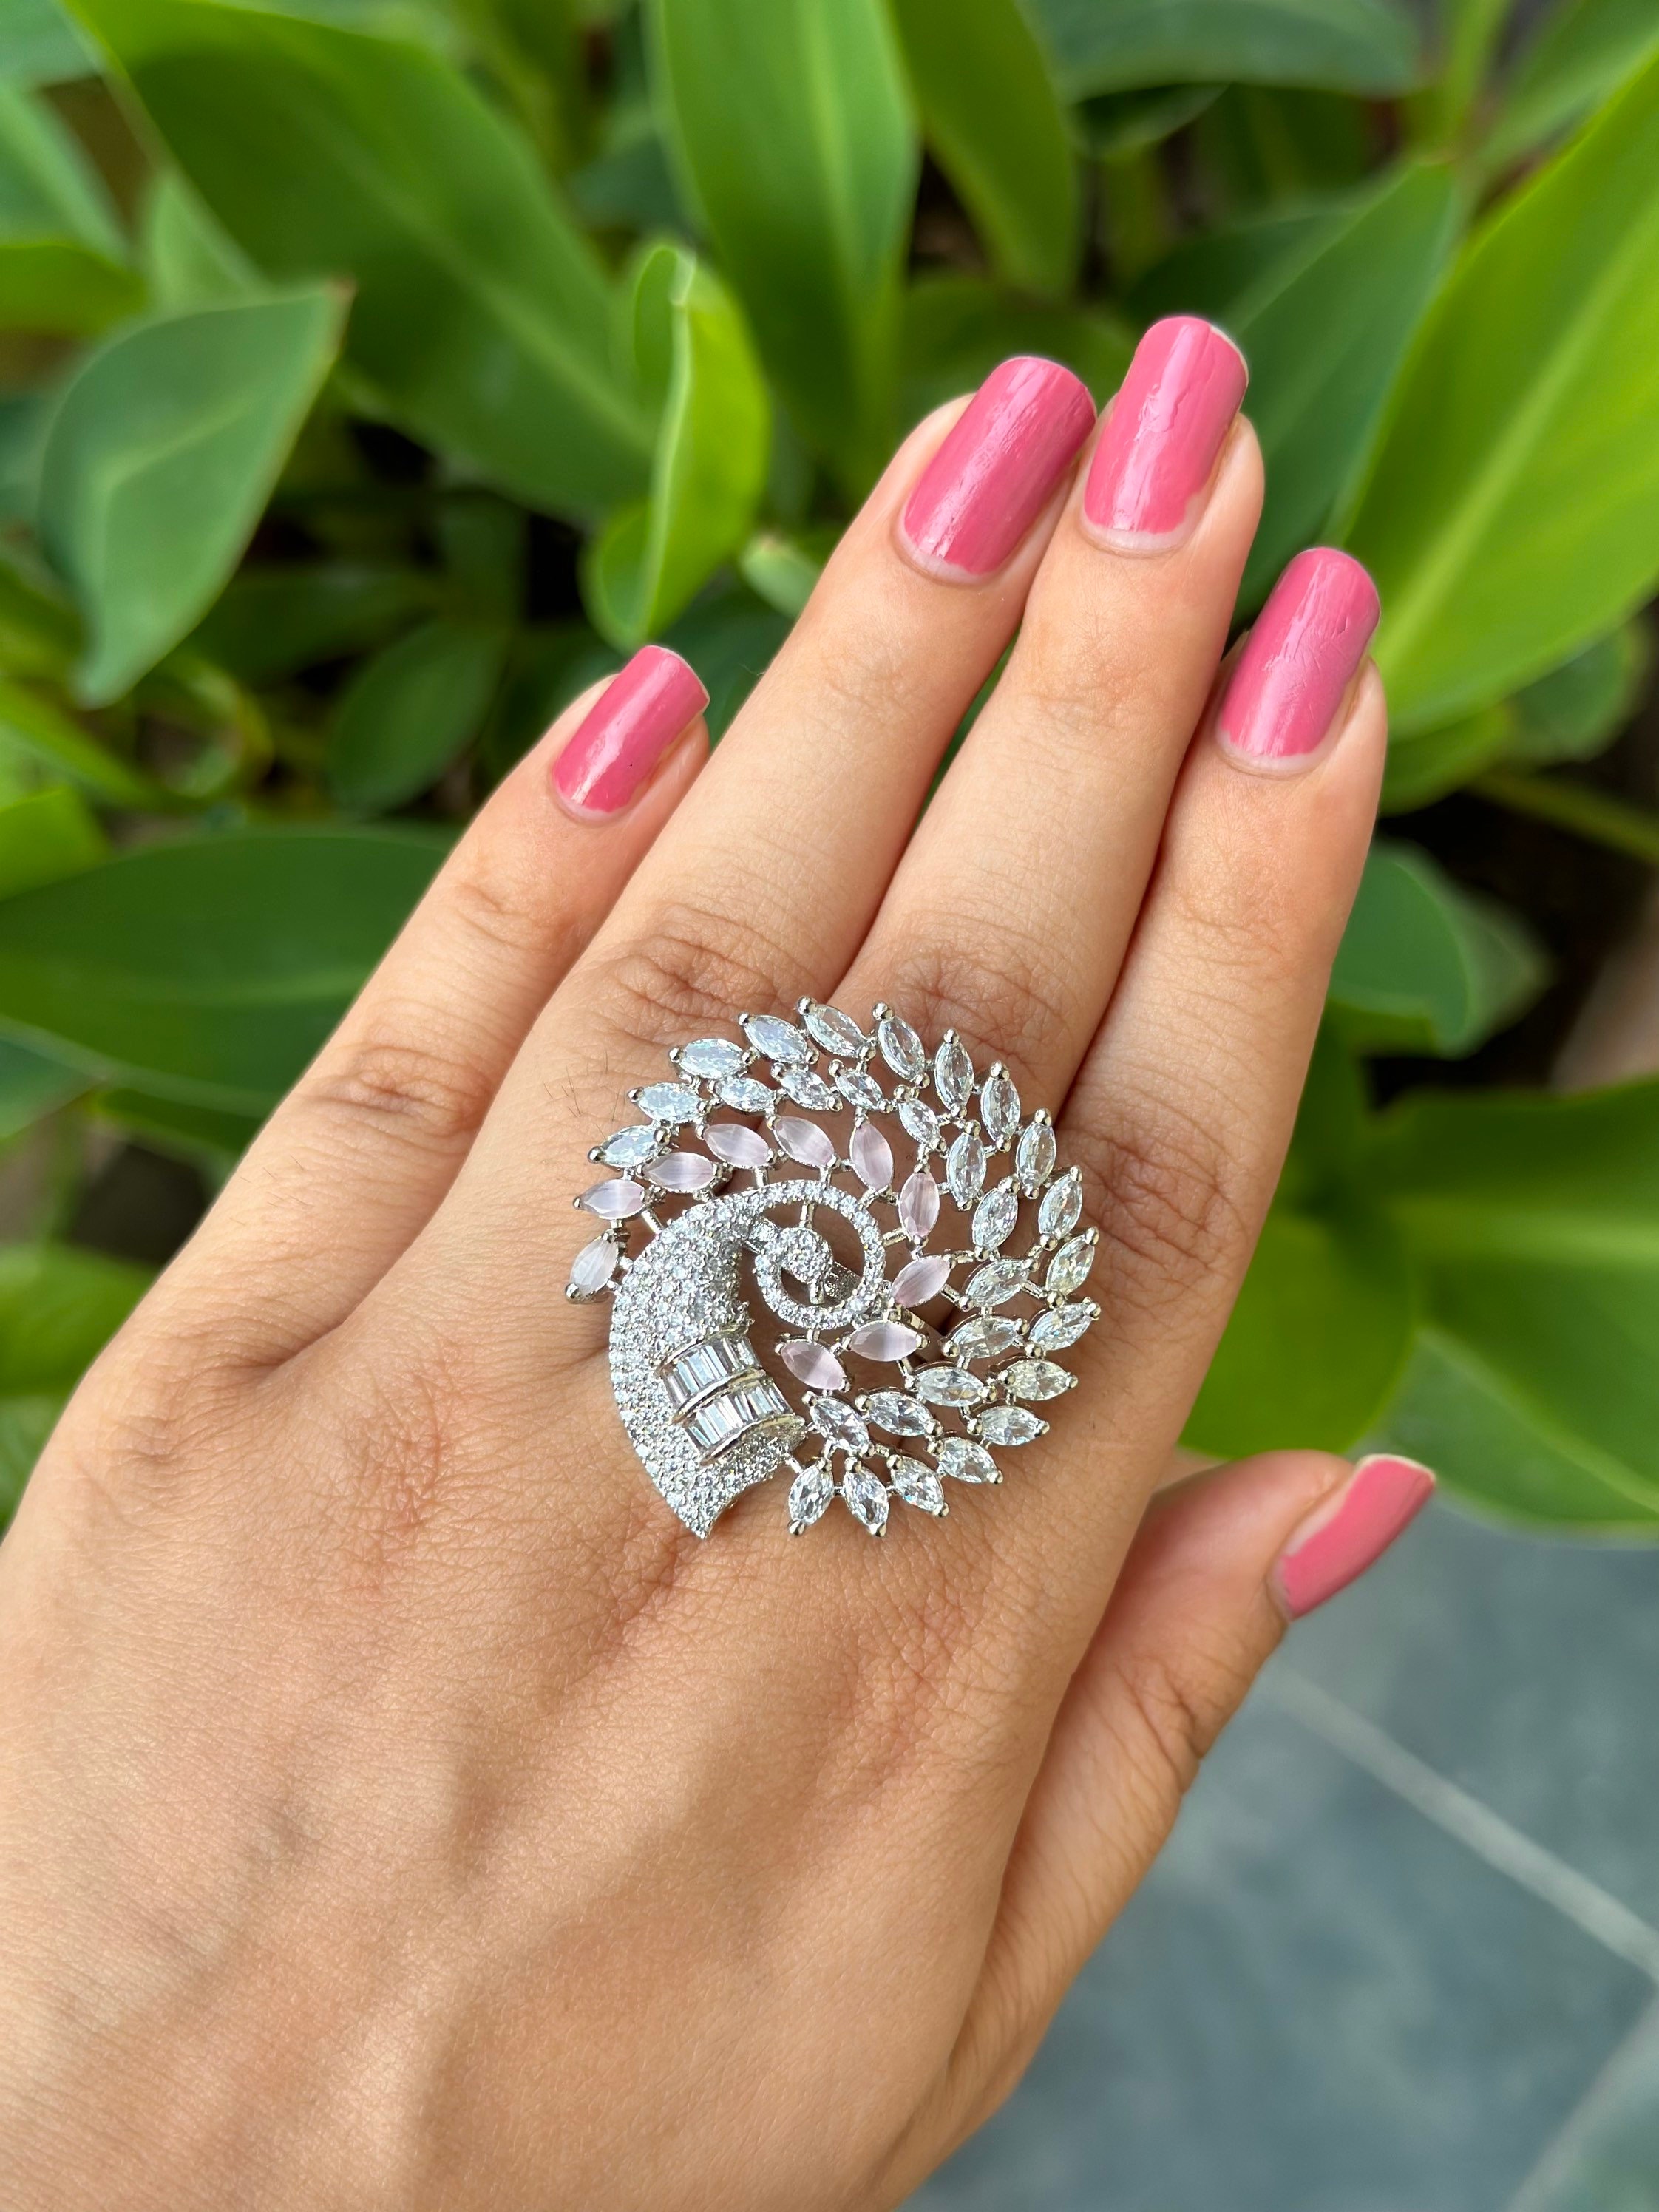 8 Cocktail Rings to Flaunt on Your Sangeet | Bridal Look | Wedding Blog